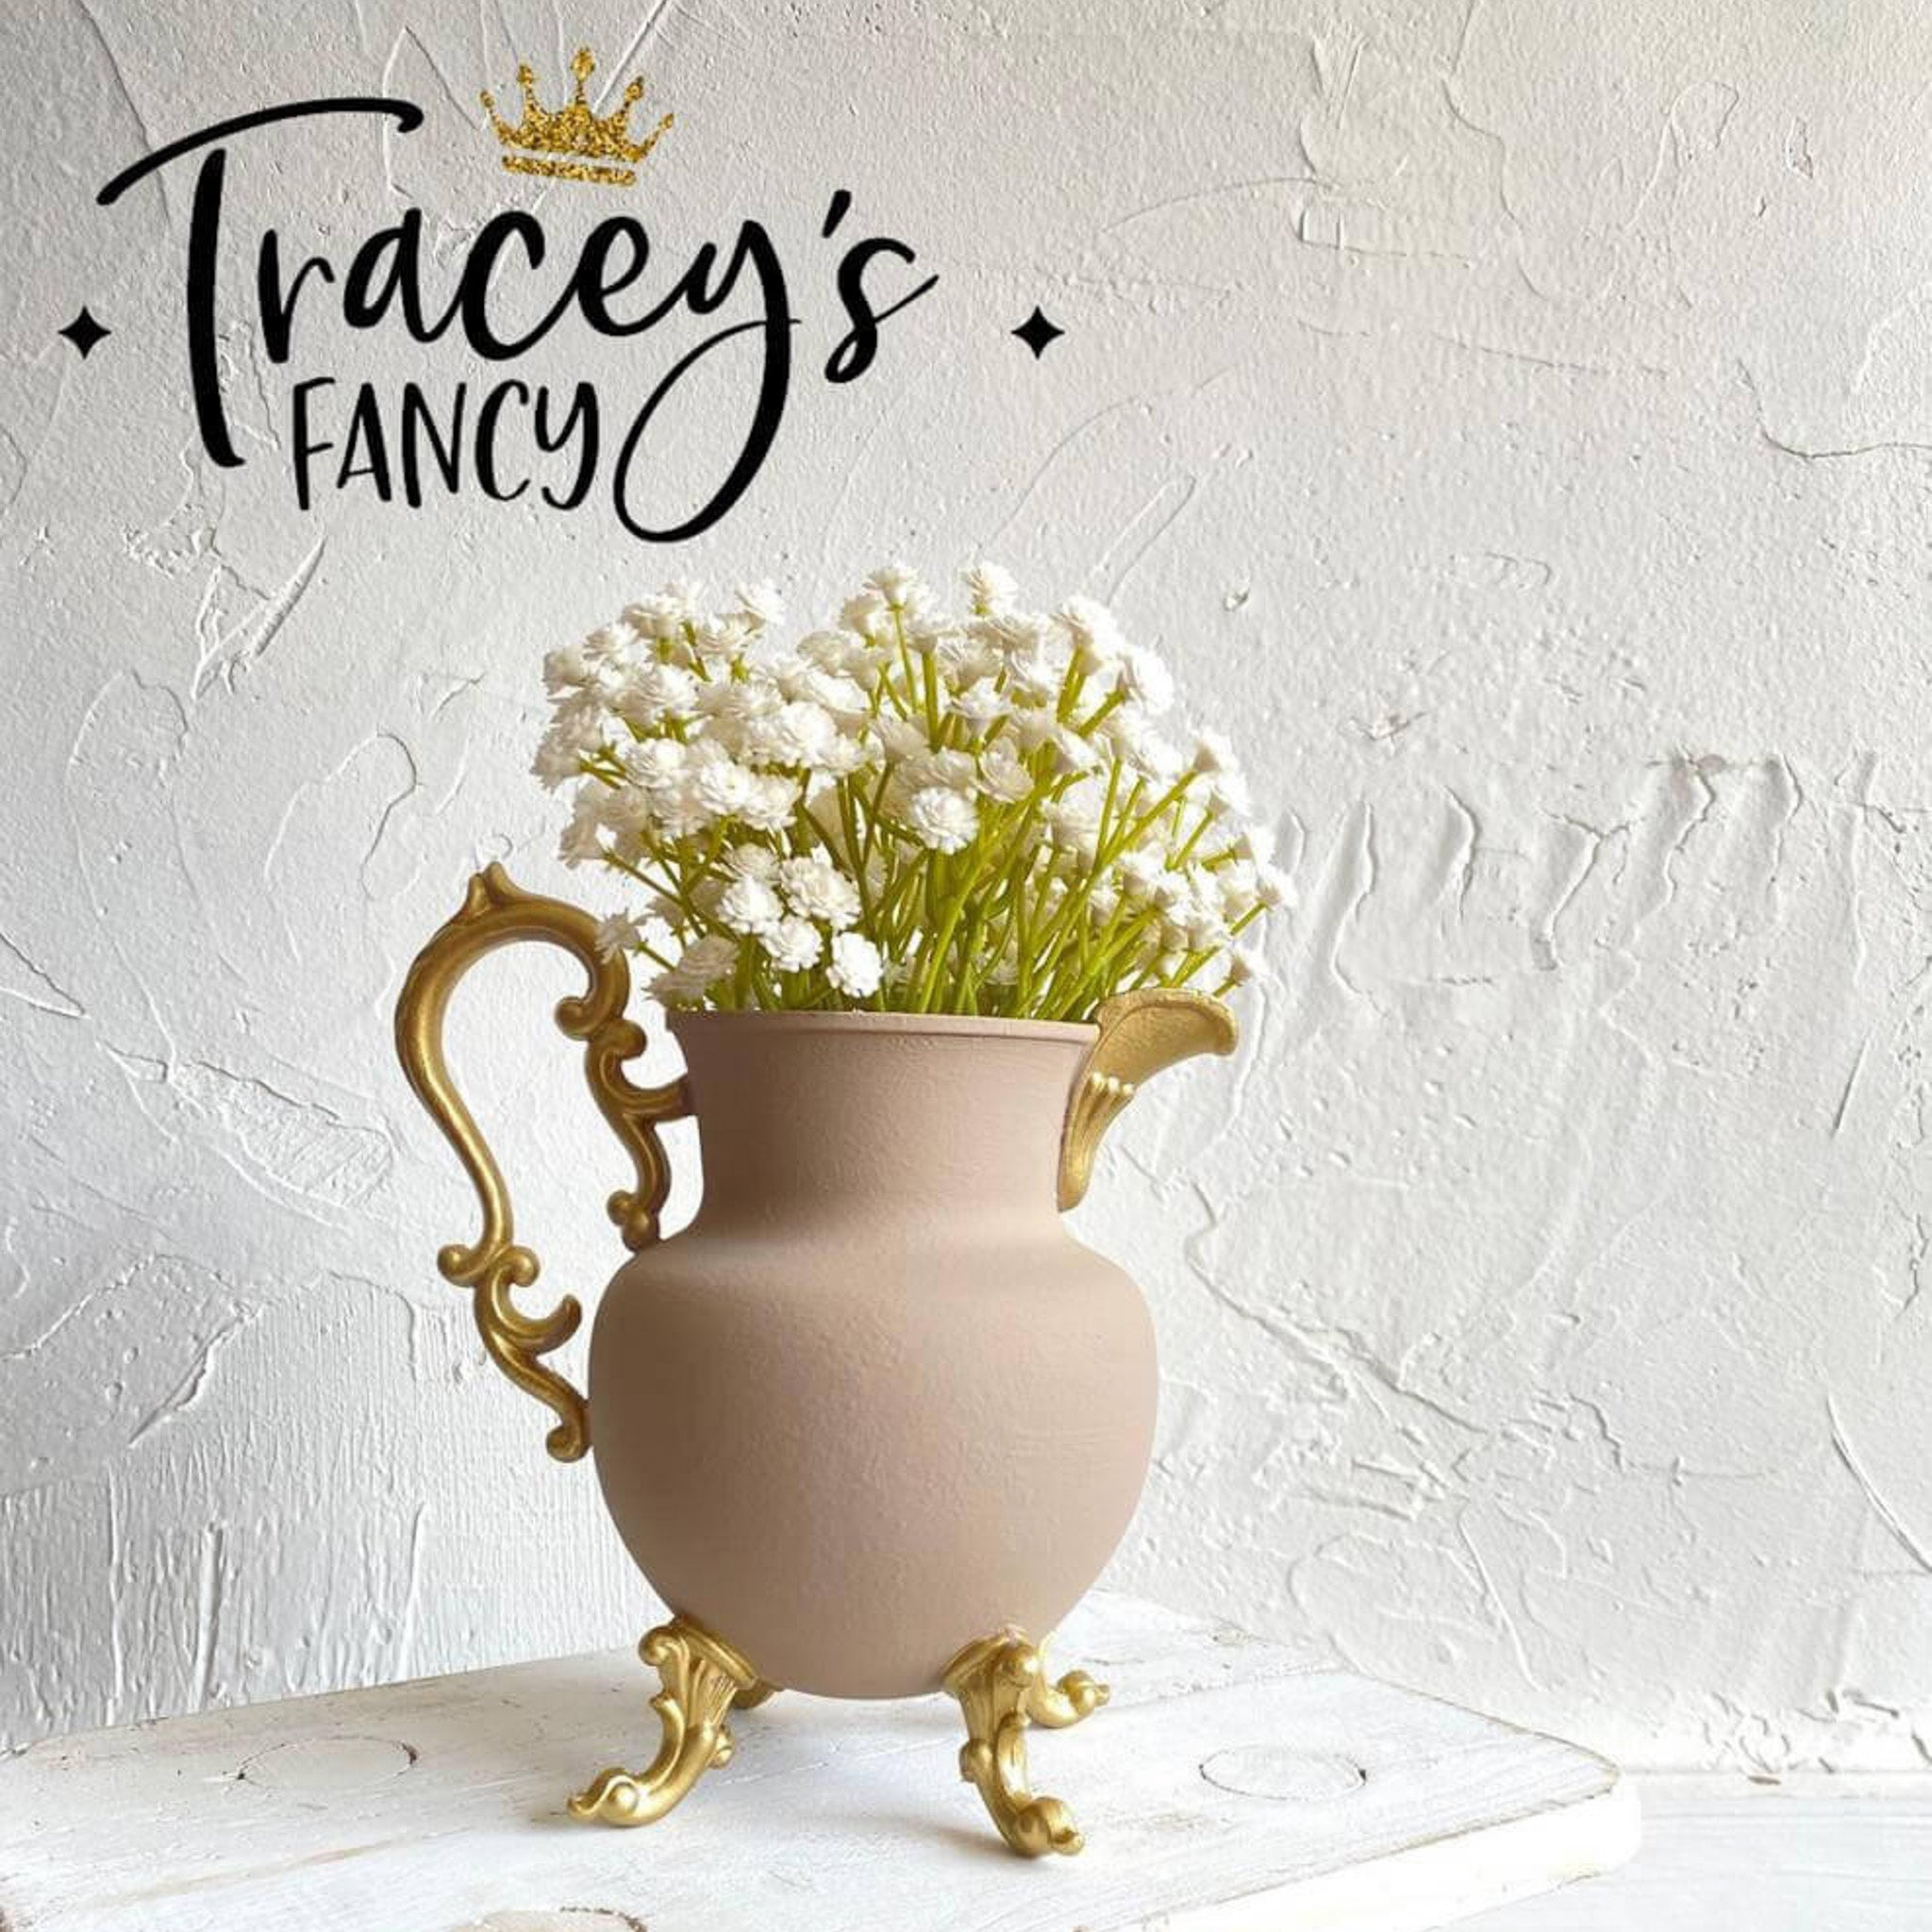 A ceramic watering vase refurbished  by Tracey's Fancy is painted in Dixie Belle's Cobblestone chalk mineral paint with gold-painted legs, handle, and pour spout .